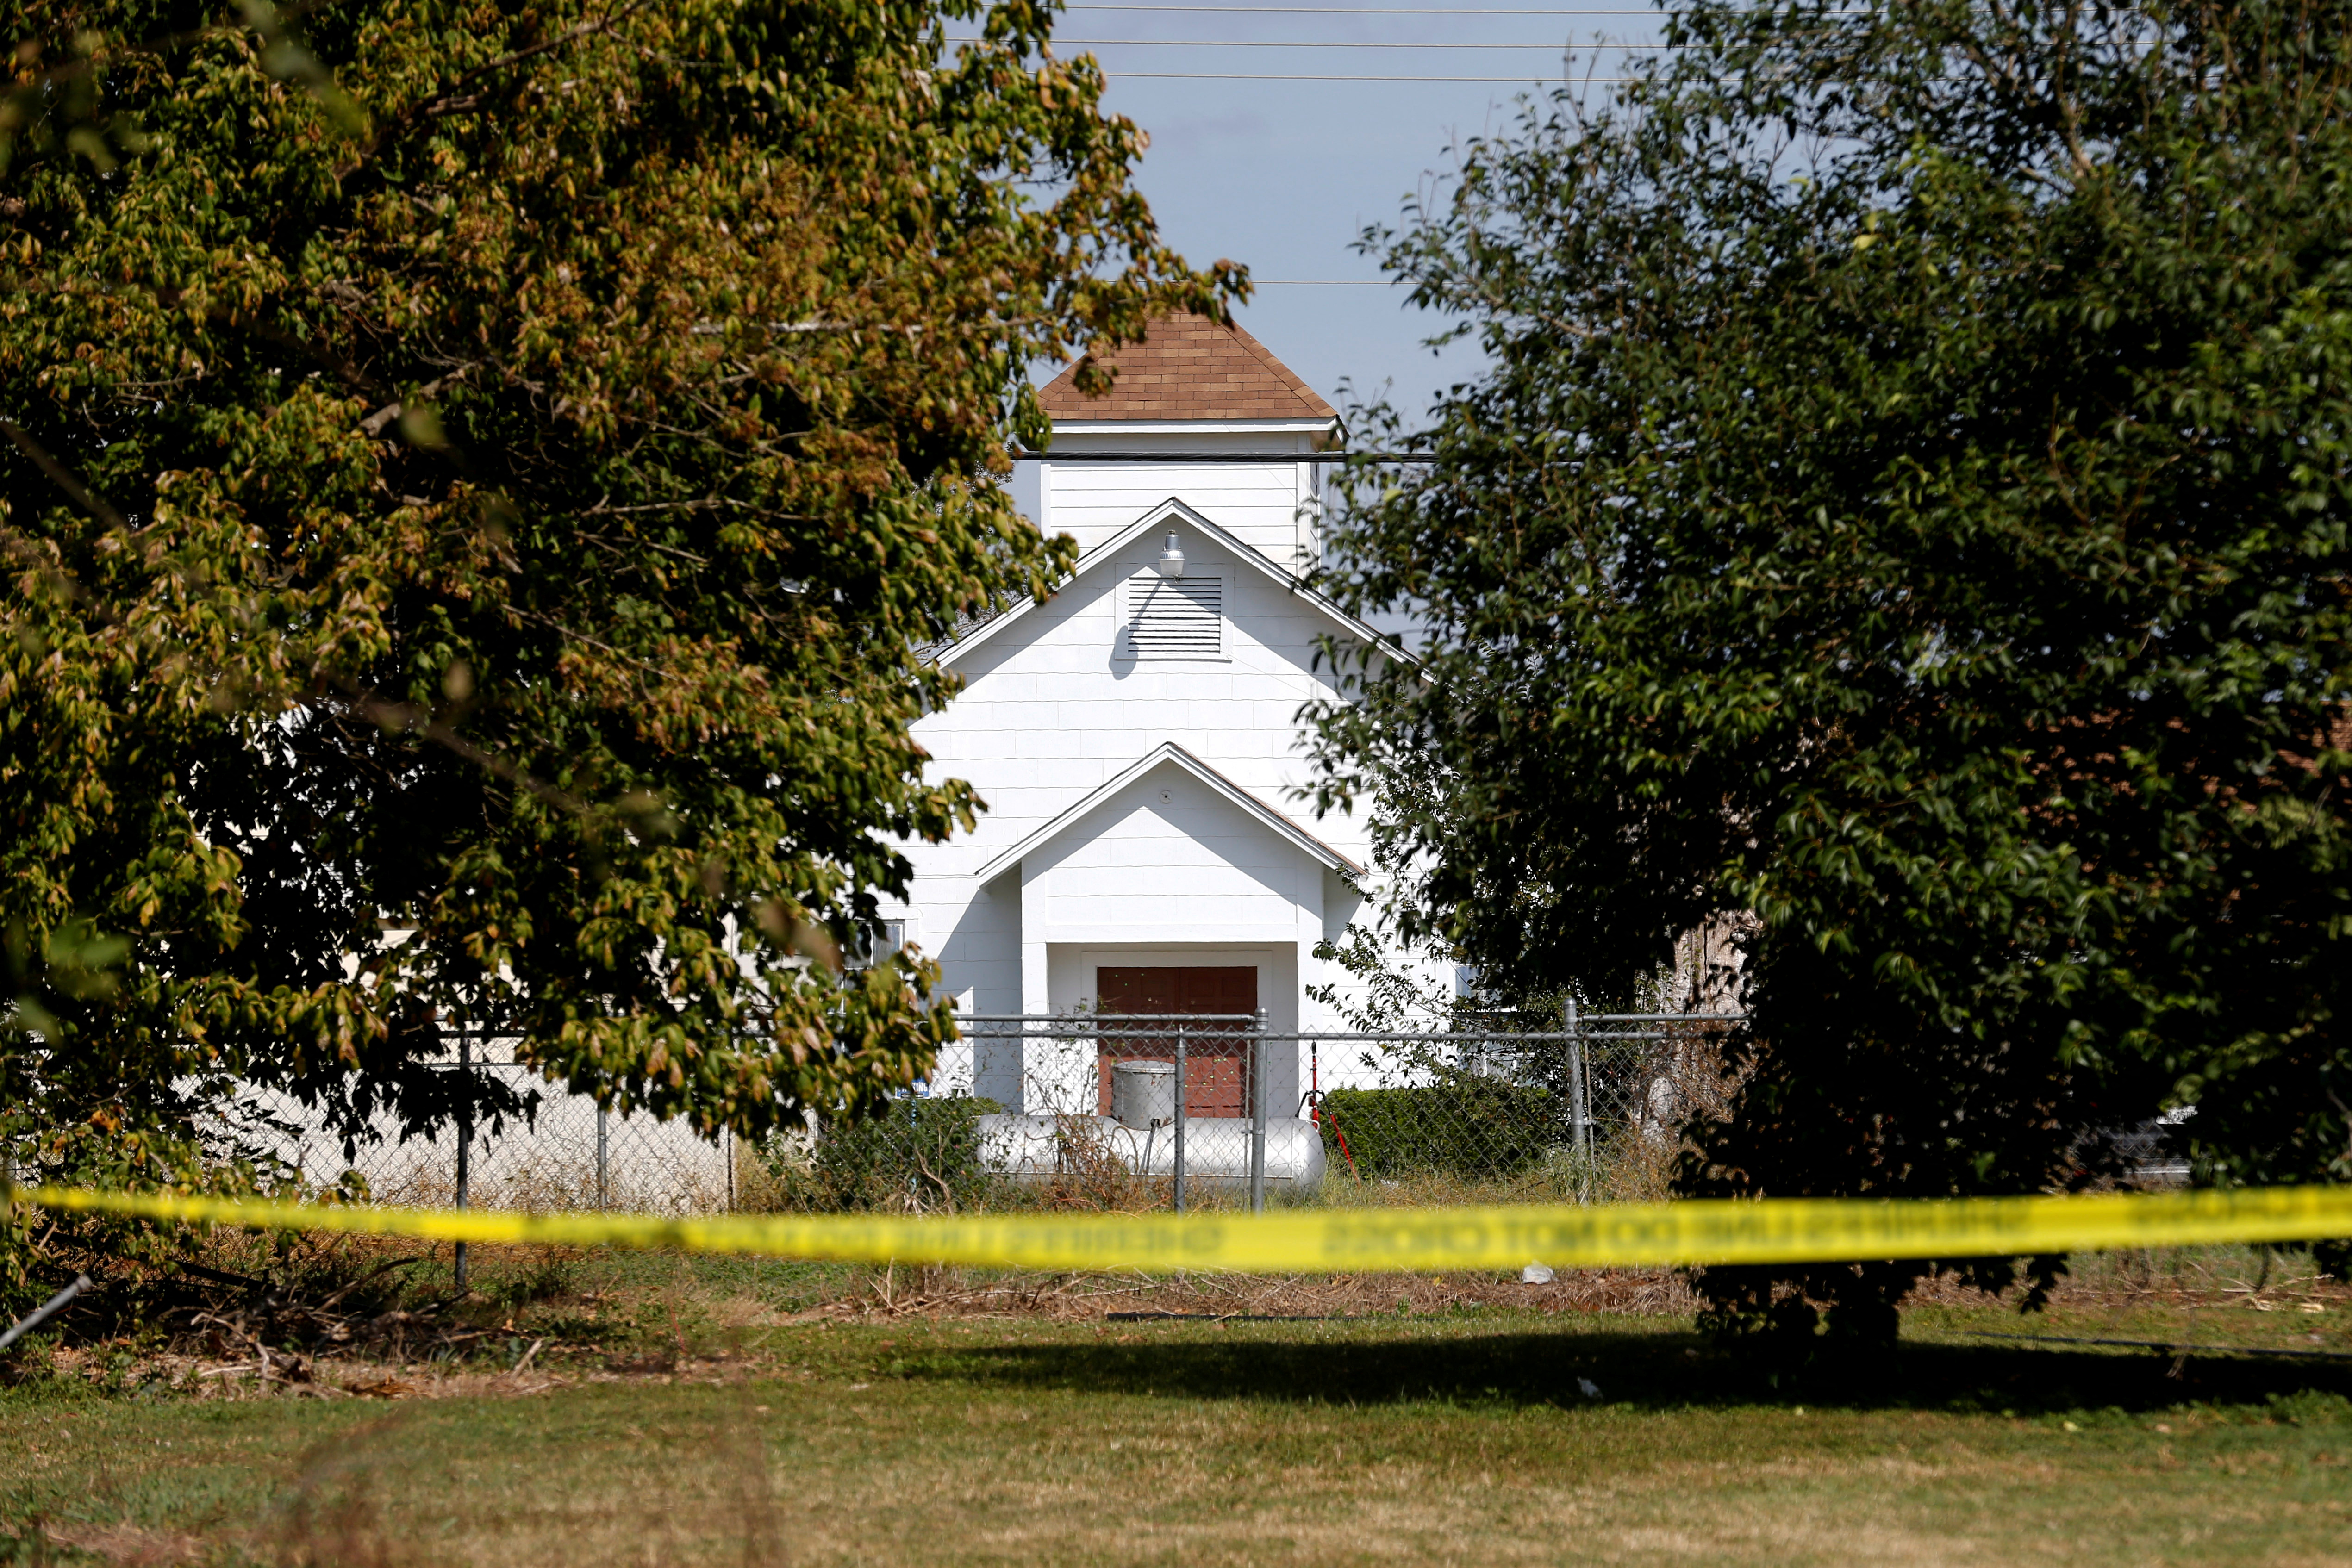 The entrance to the First Baptist Church of Sutherland Springs, the site of the shooting, is seen in Sutherland Springs